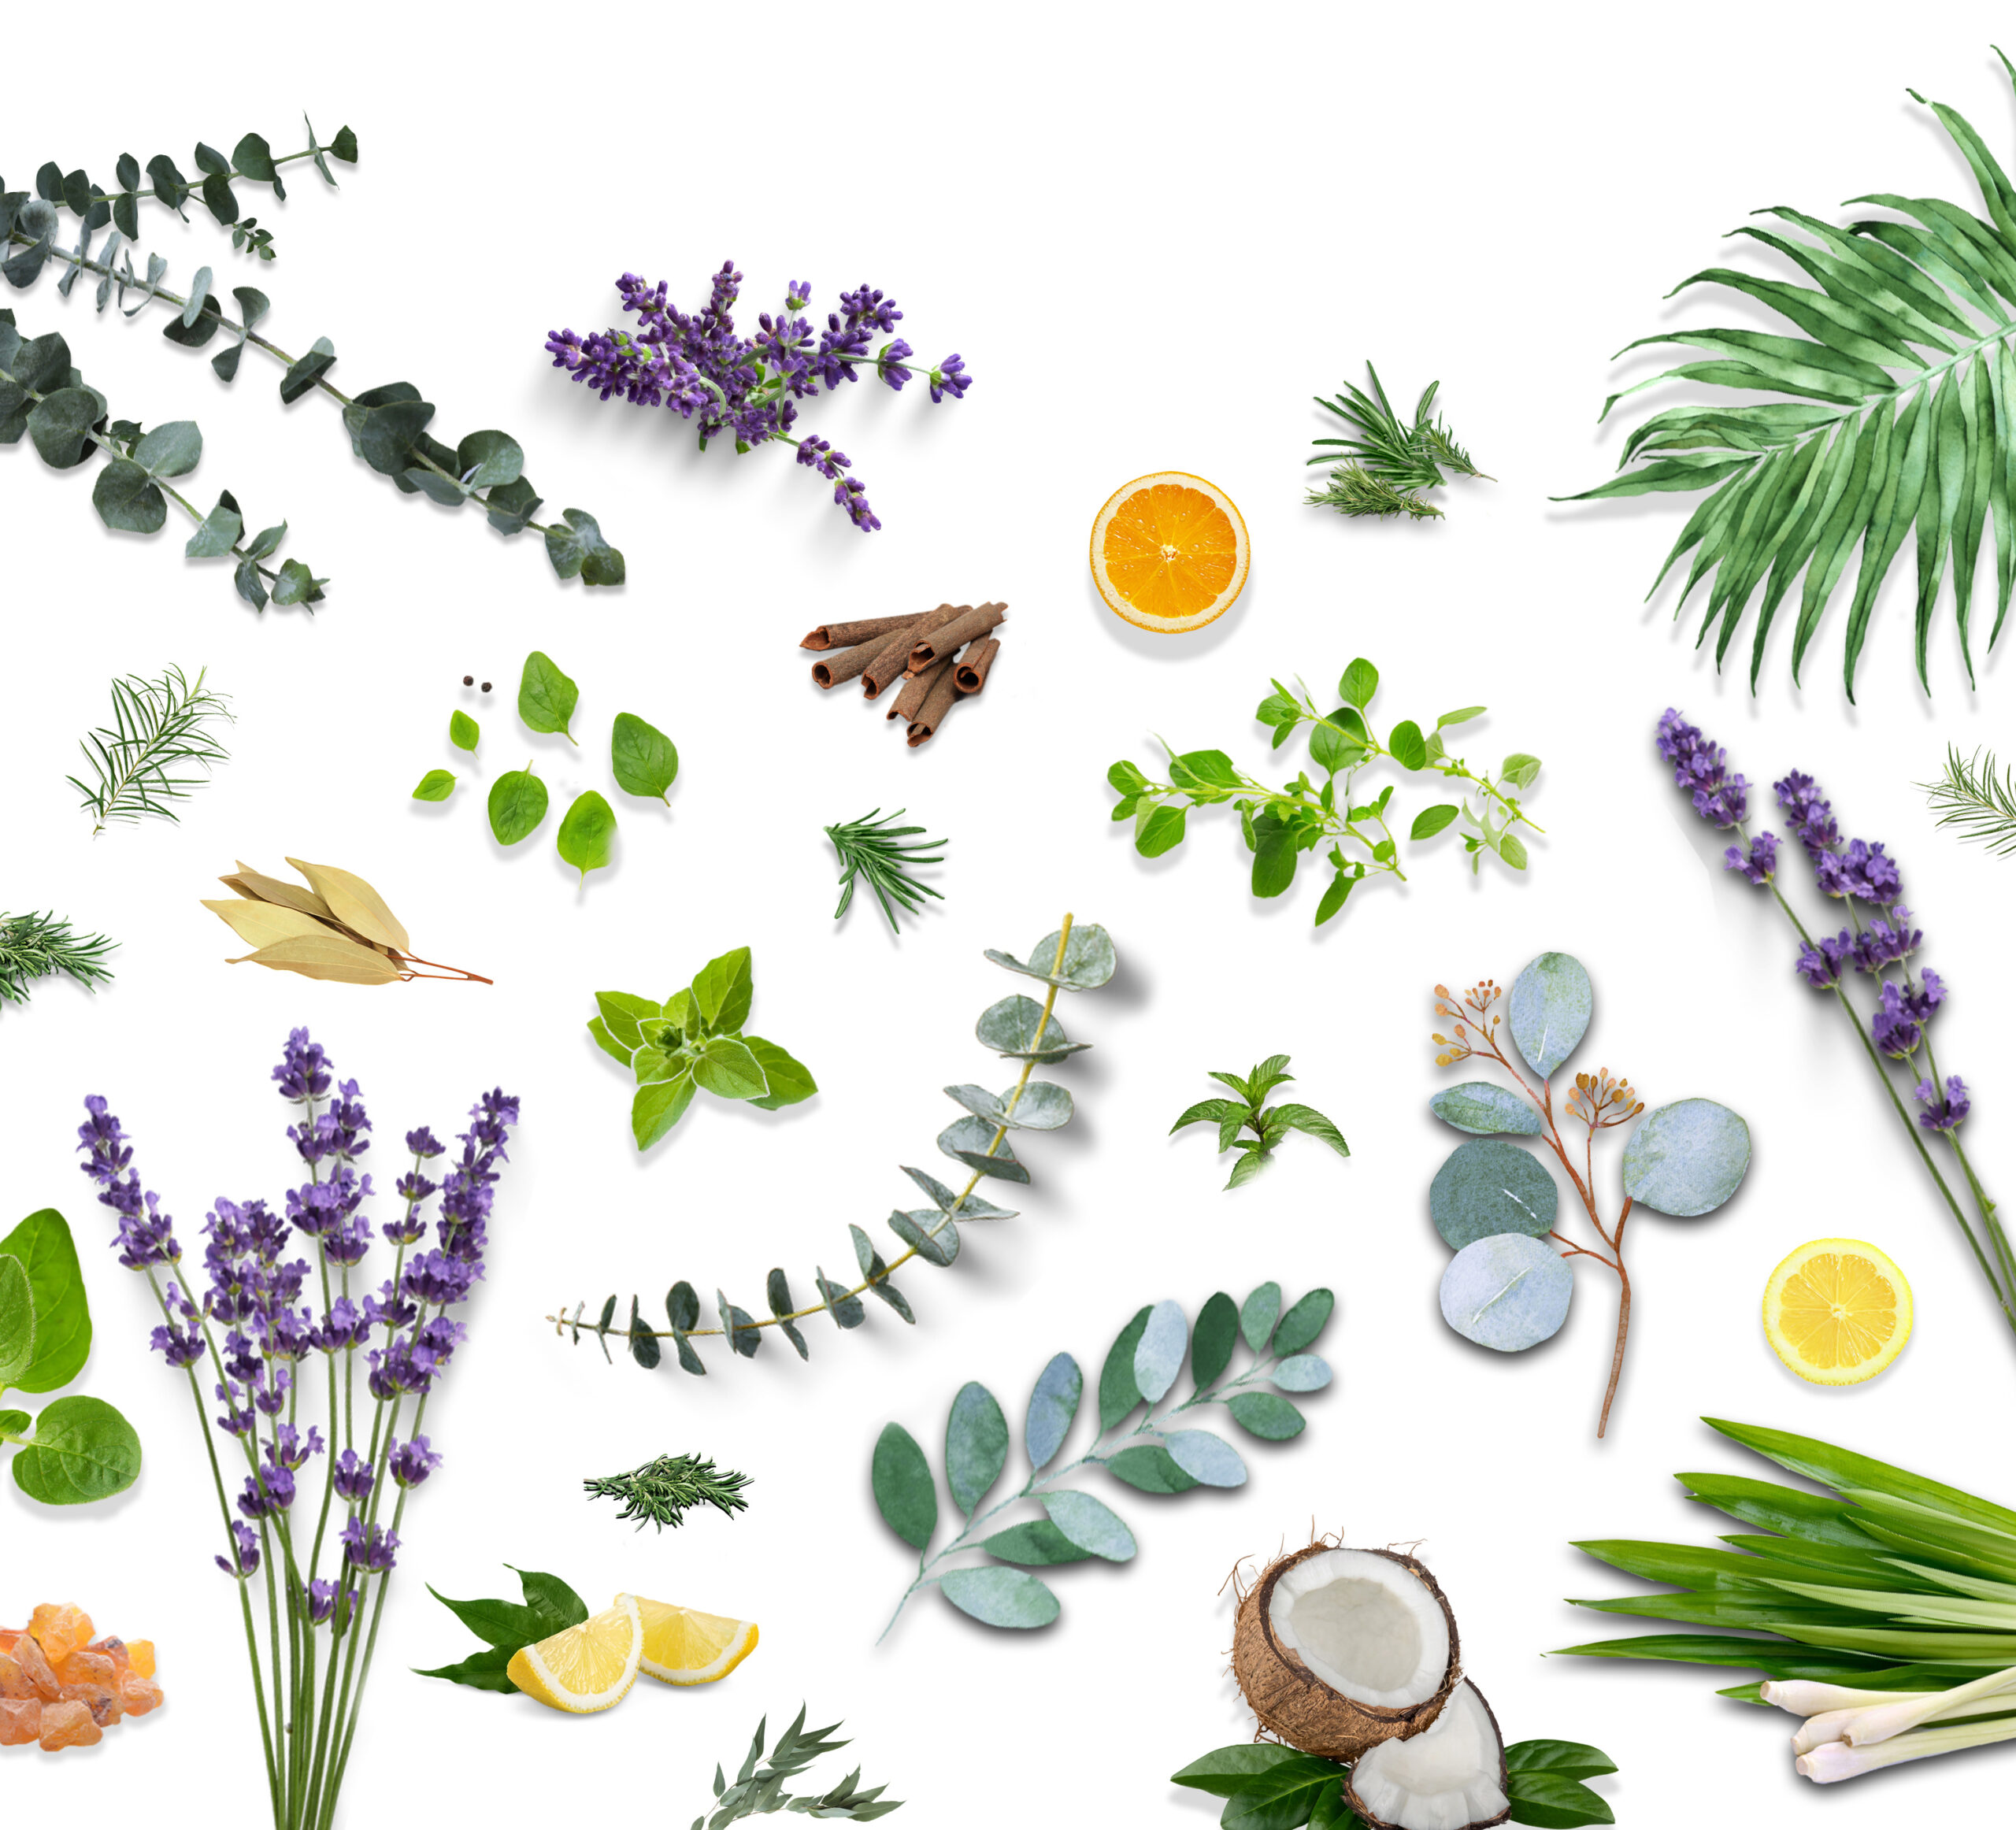 Flat lay of various fruits and plants